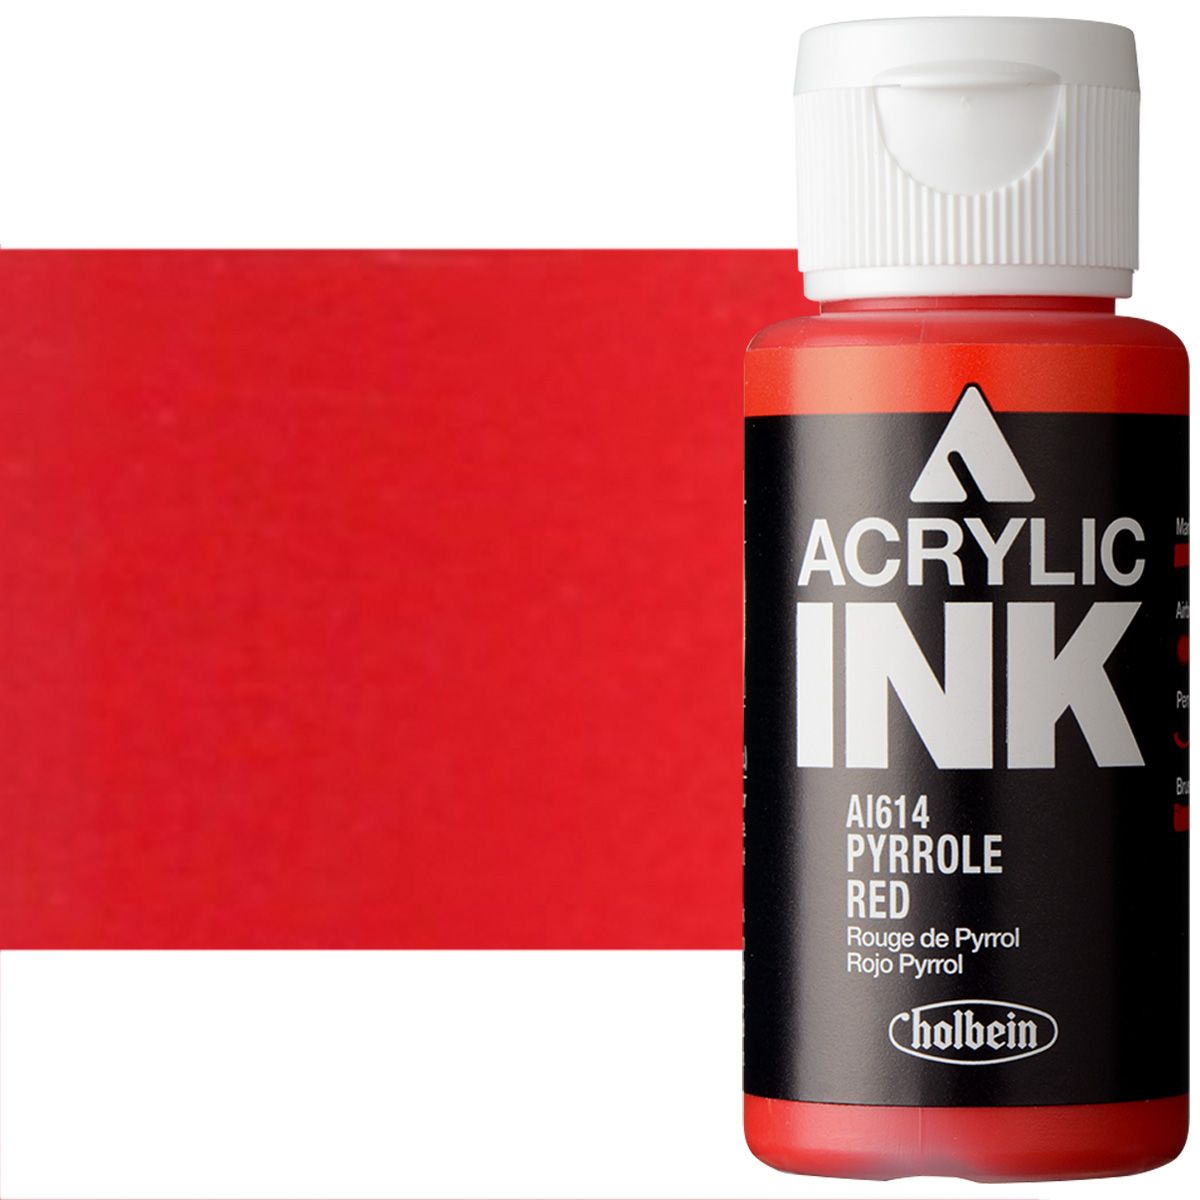 Holbein Acrylic Ink - Pyrrole Red, 30ml